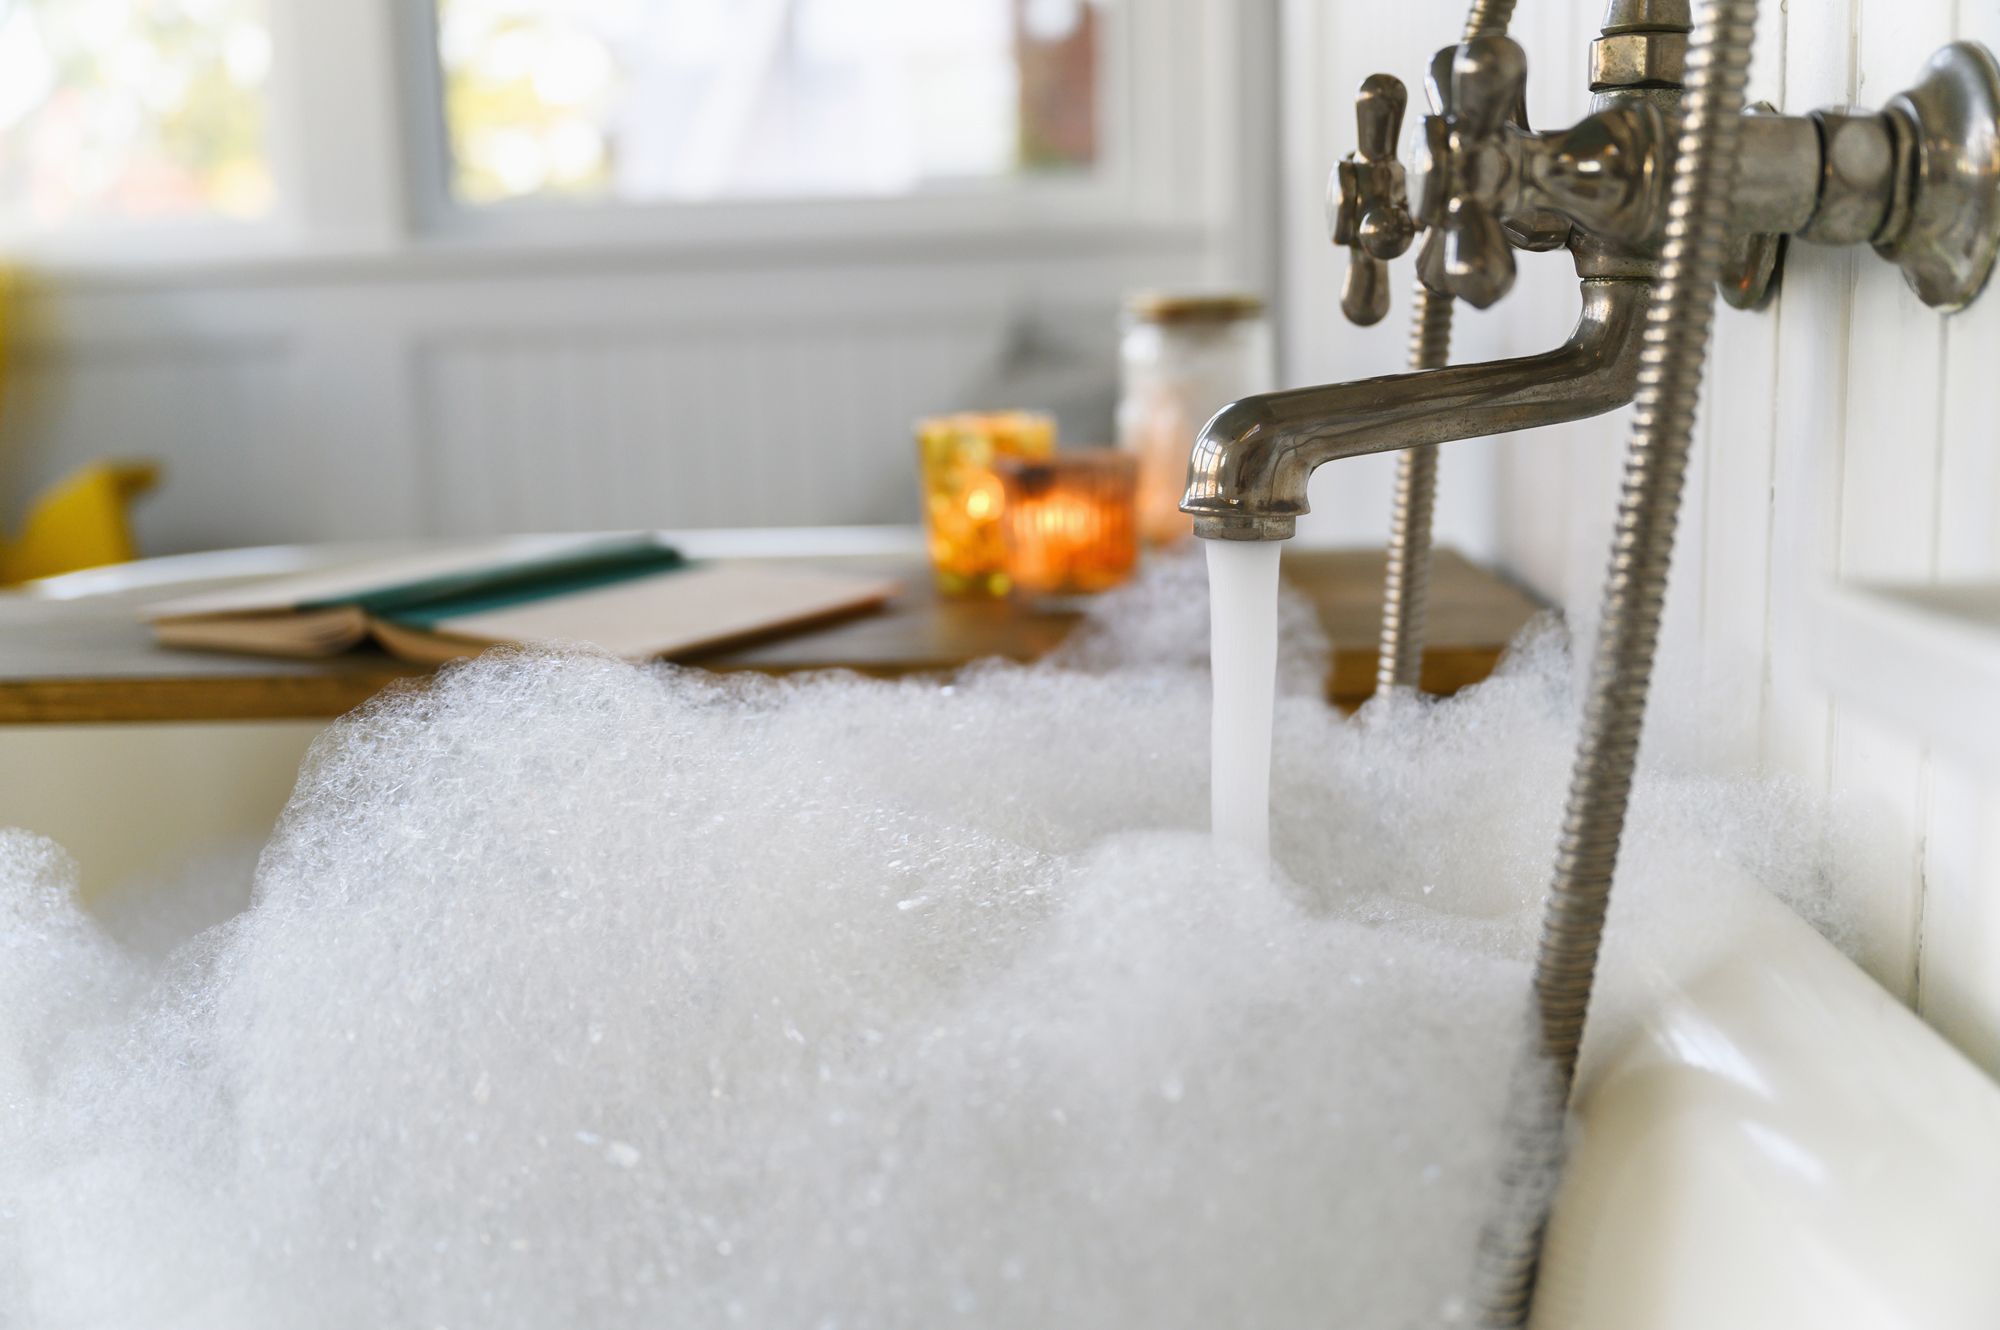 15 Bubble Bath Products for Adults 2023 - Relaxing Bath Soaks